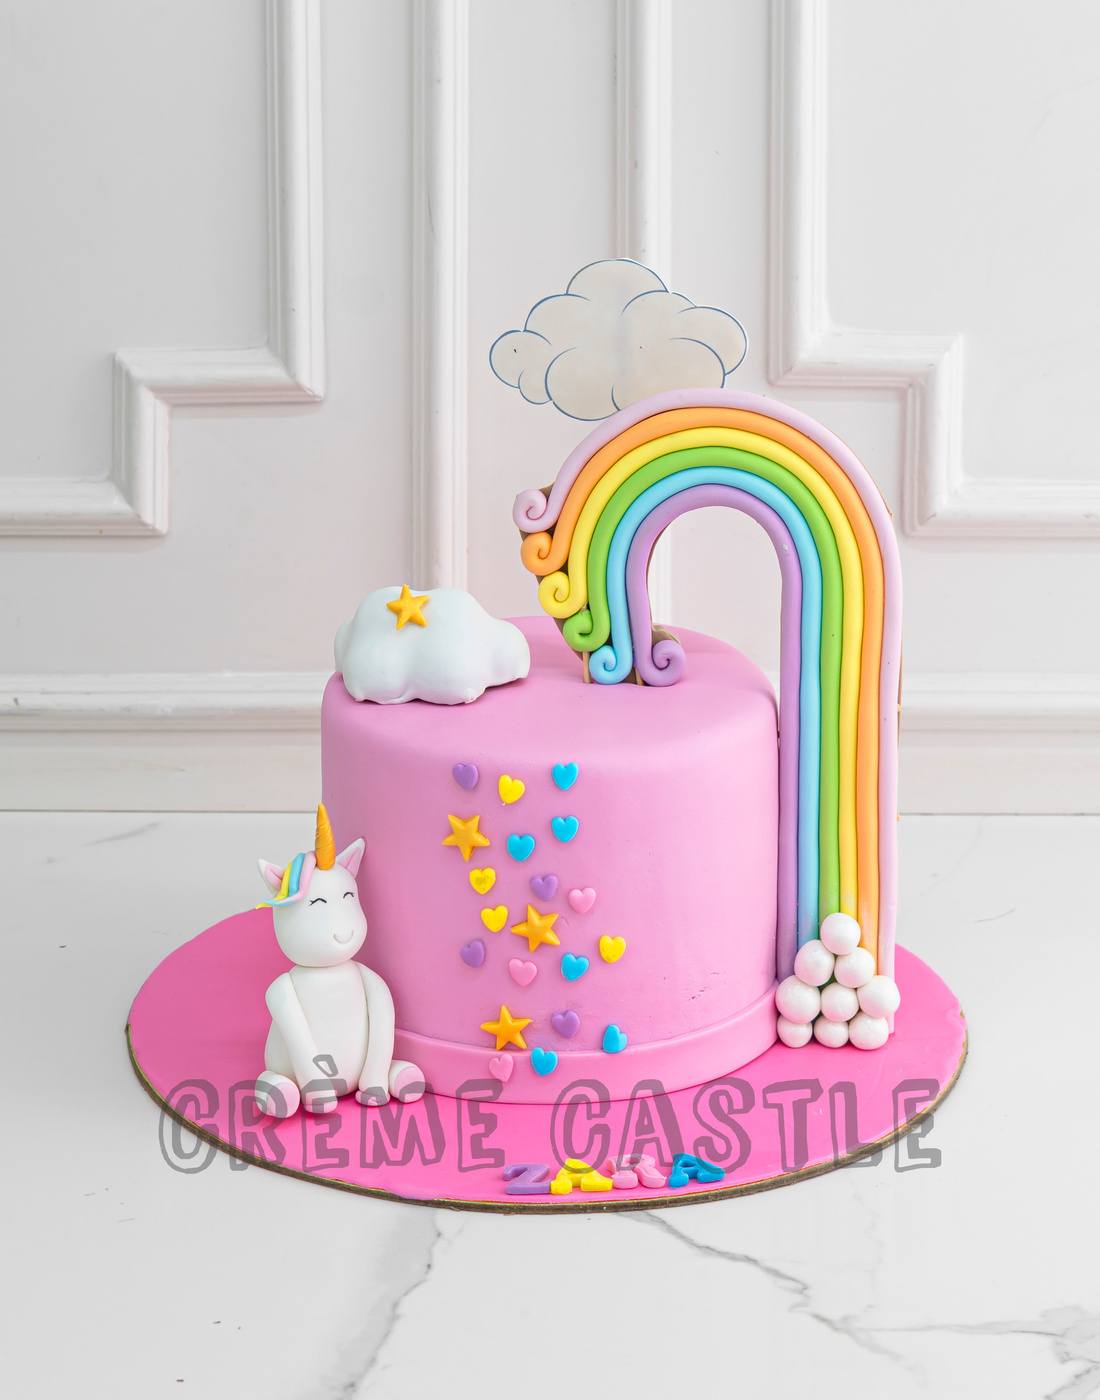 These Delightful Unicorn Cakes Look Too Magical to Be Real